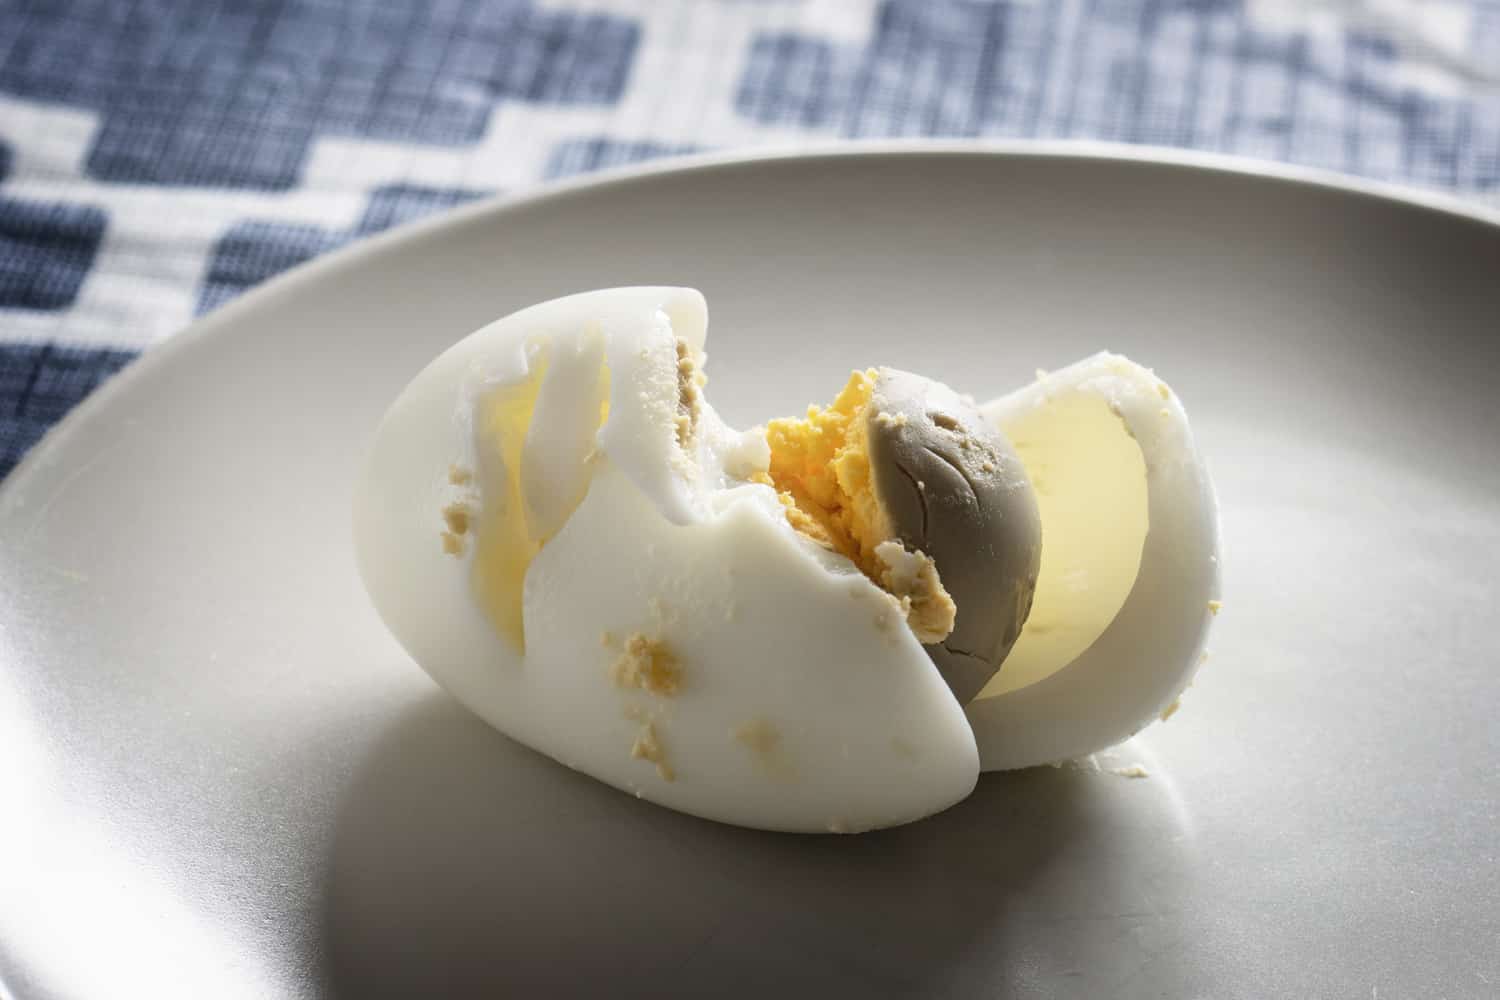 Overcooked Hard Boiled Egg with green or grey tint around the yolk.